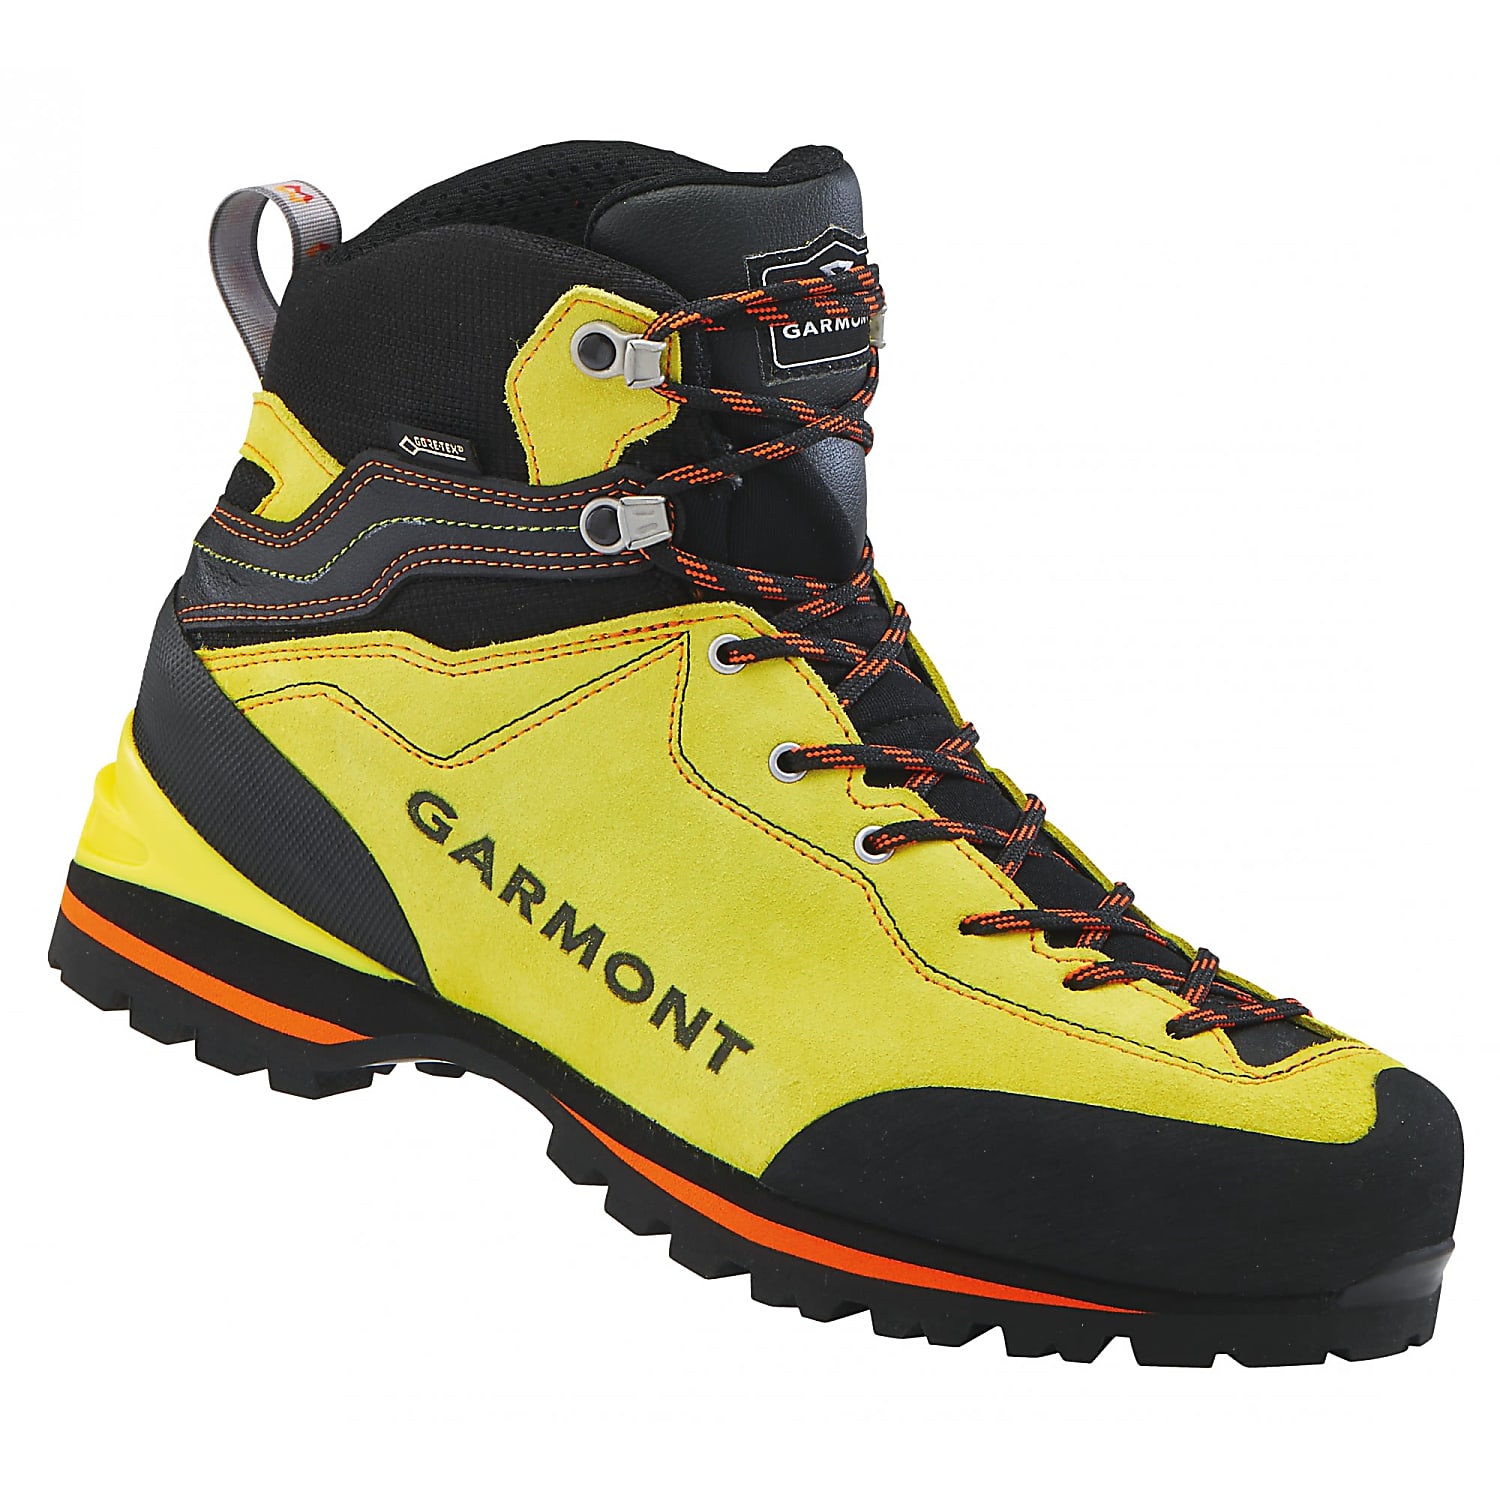 Nomination liver accident Garmont M ASCENT GTX, Yellow - Orange - Fast and cheap shipping -  www.exxpozed.com